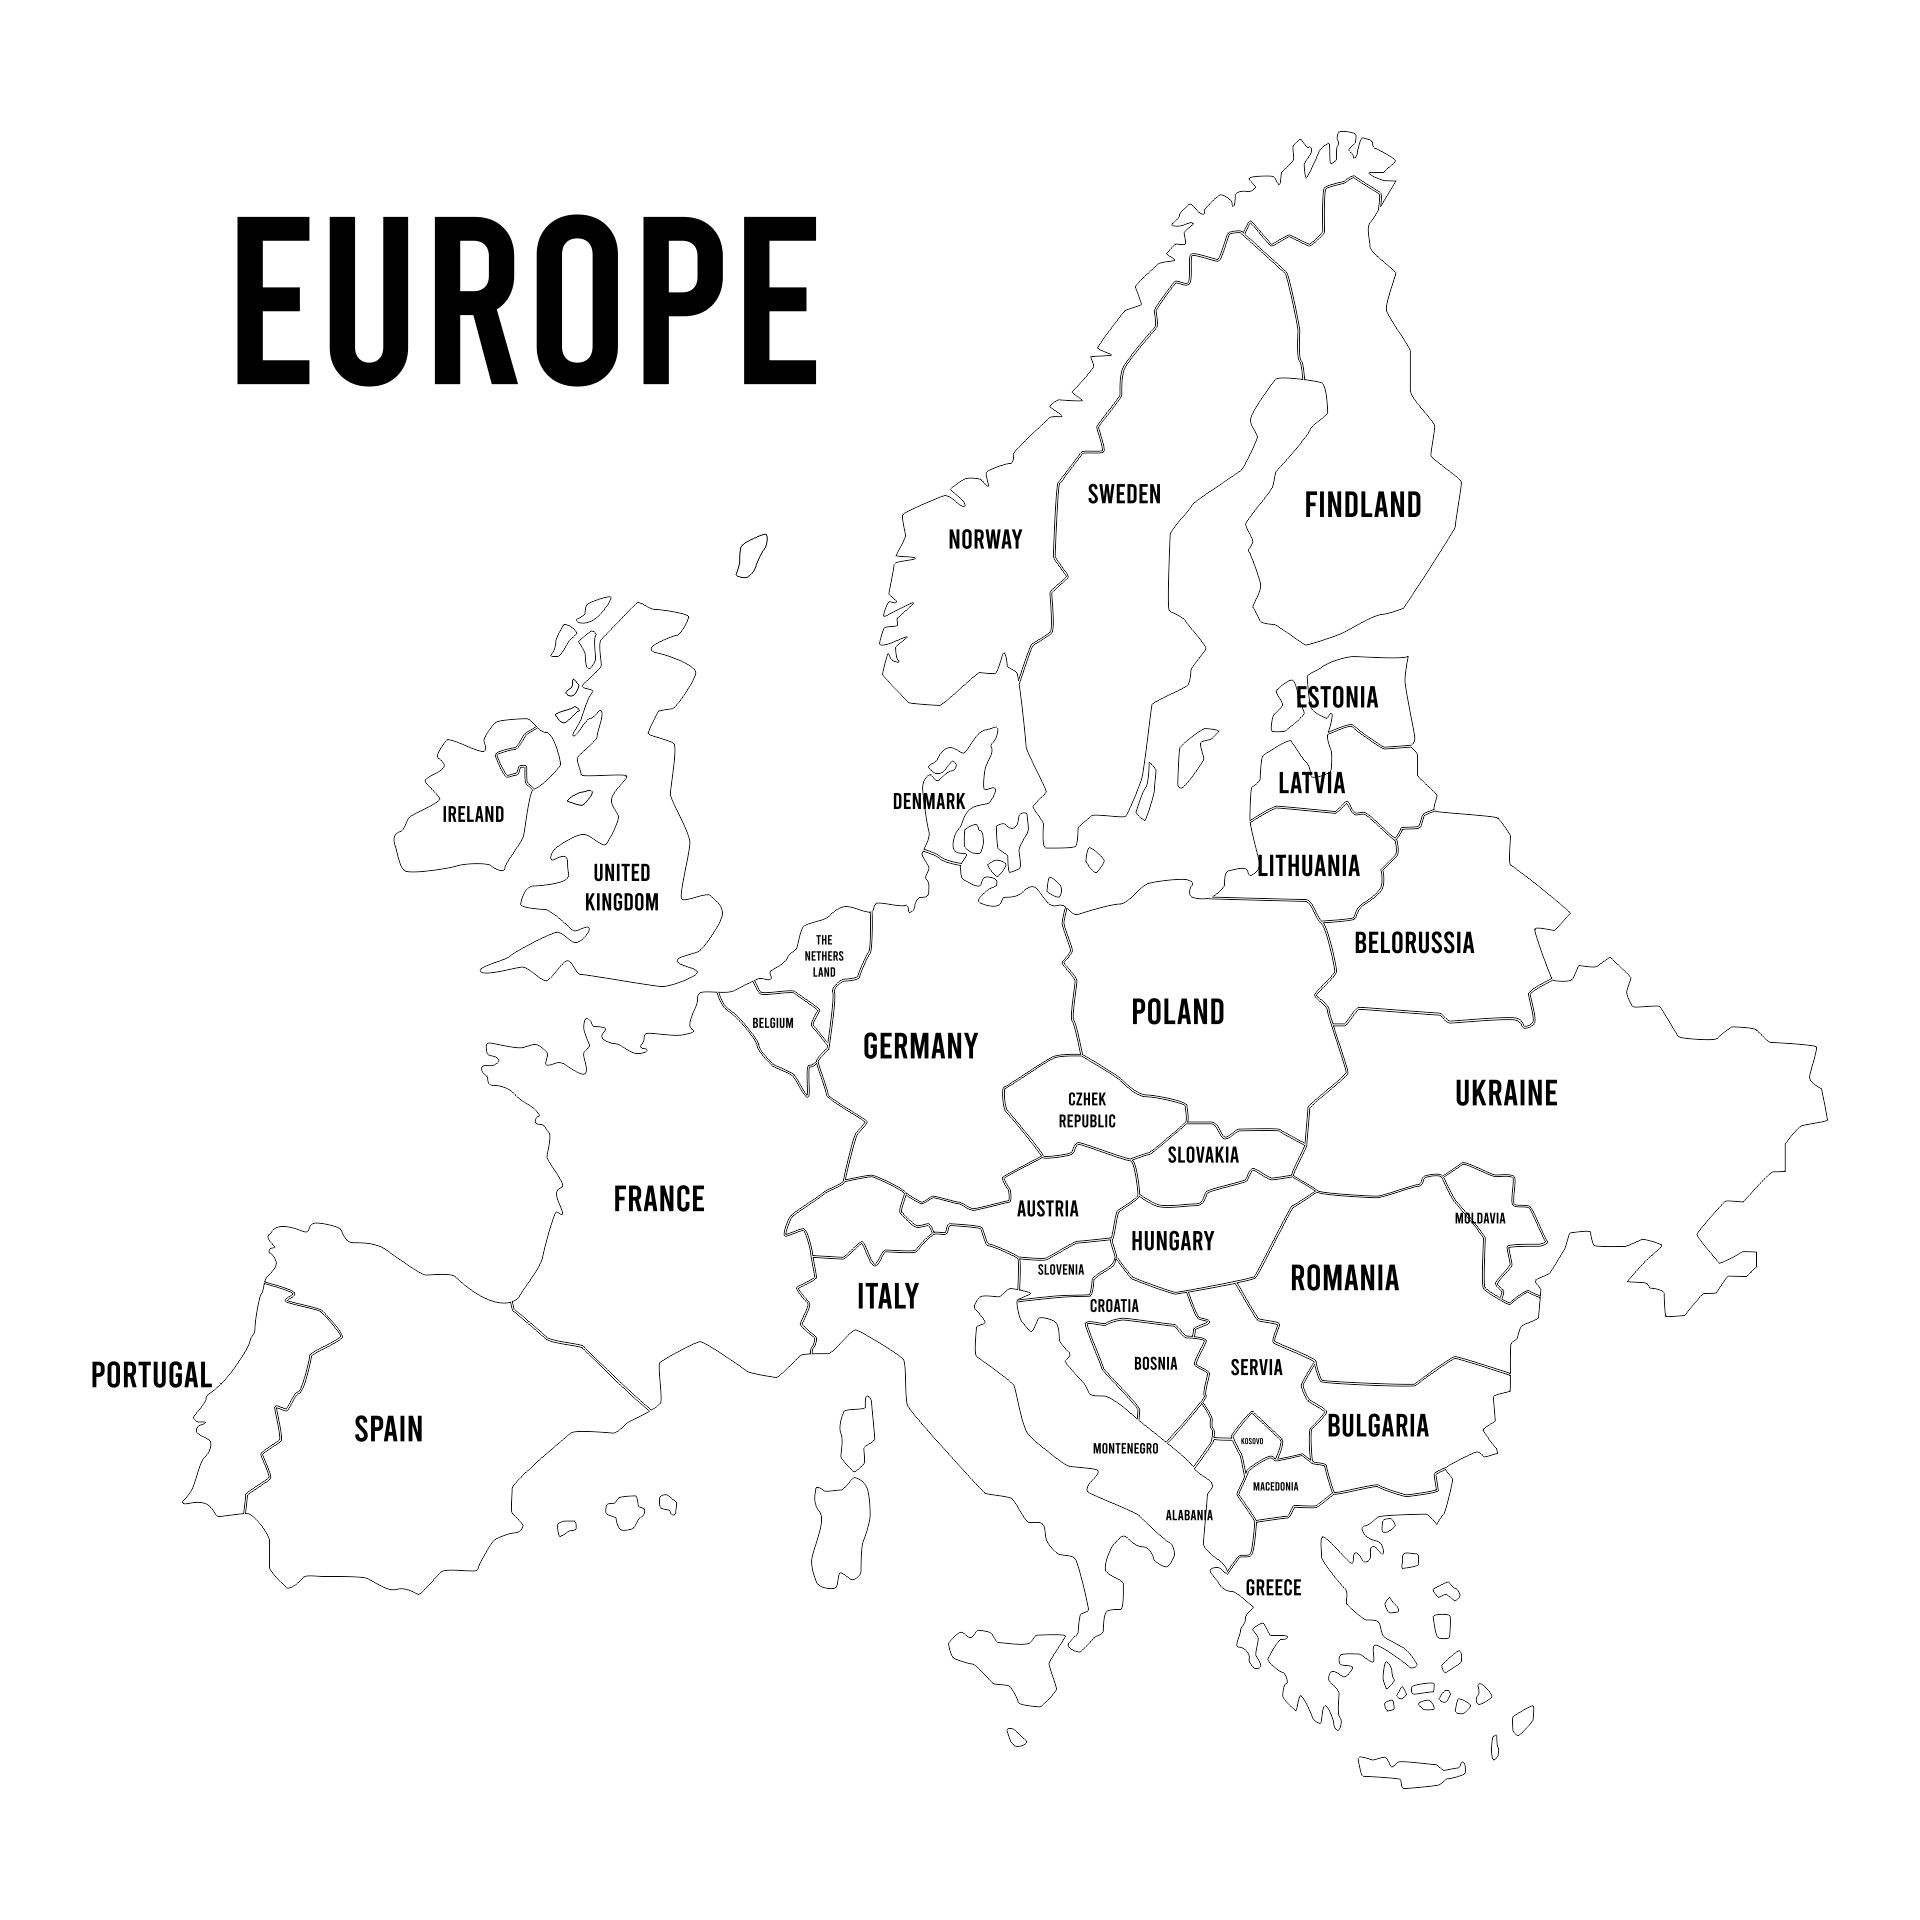 Printable Black and White Europe Map Example_15896